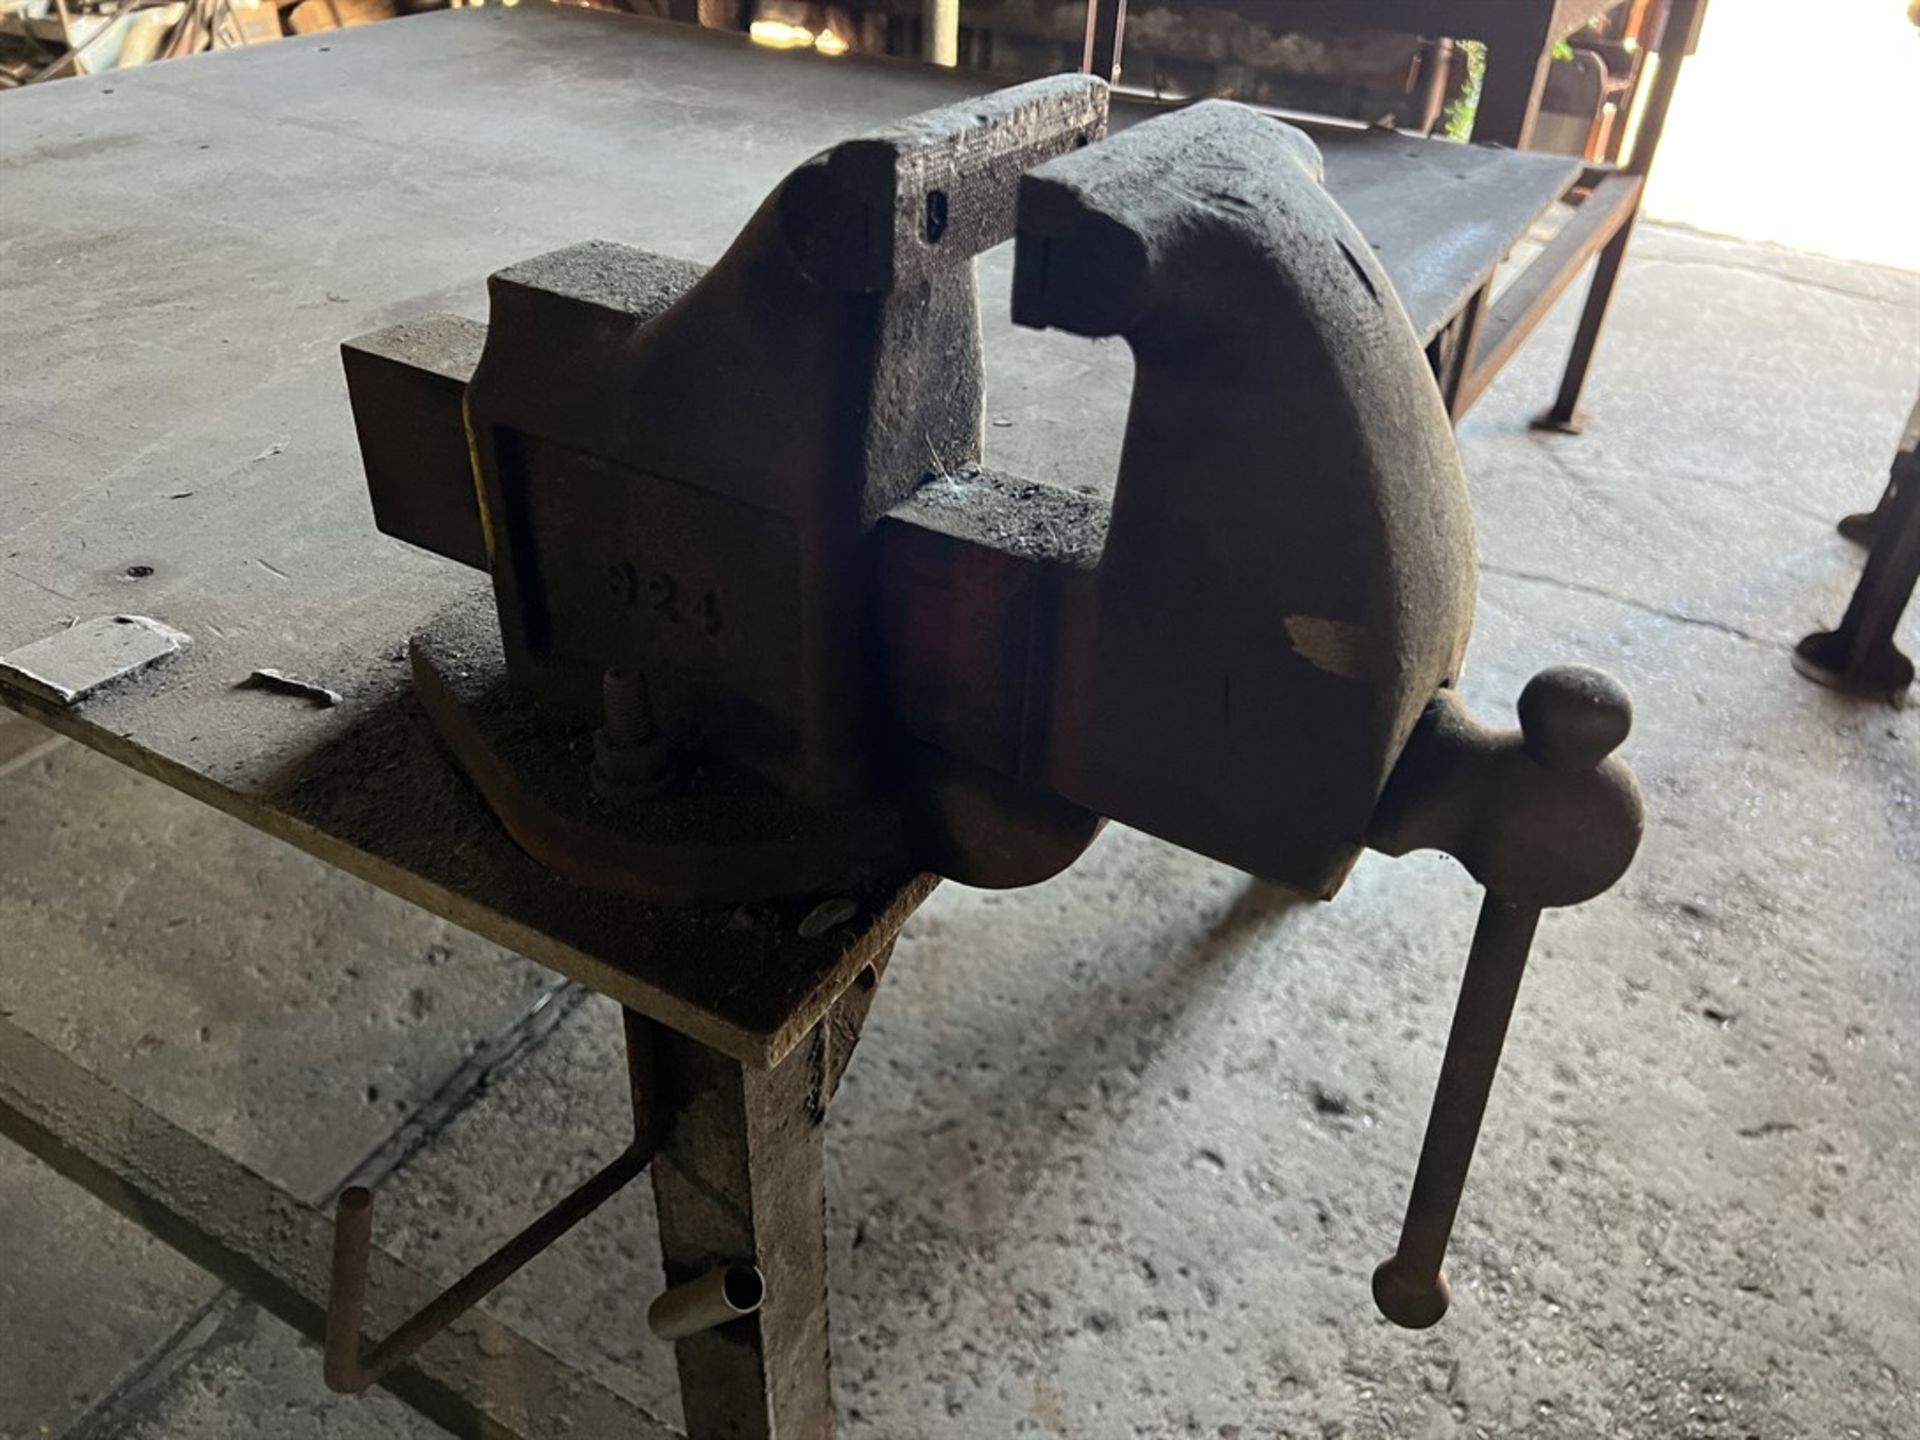 Steel Table, 4' x 4', w/ATHOL 4" Bench Vise (Building 39) - Image 3 of 3